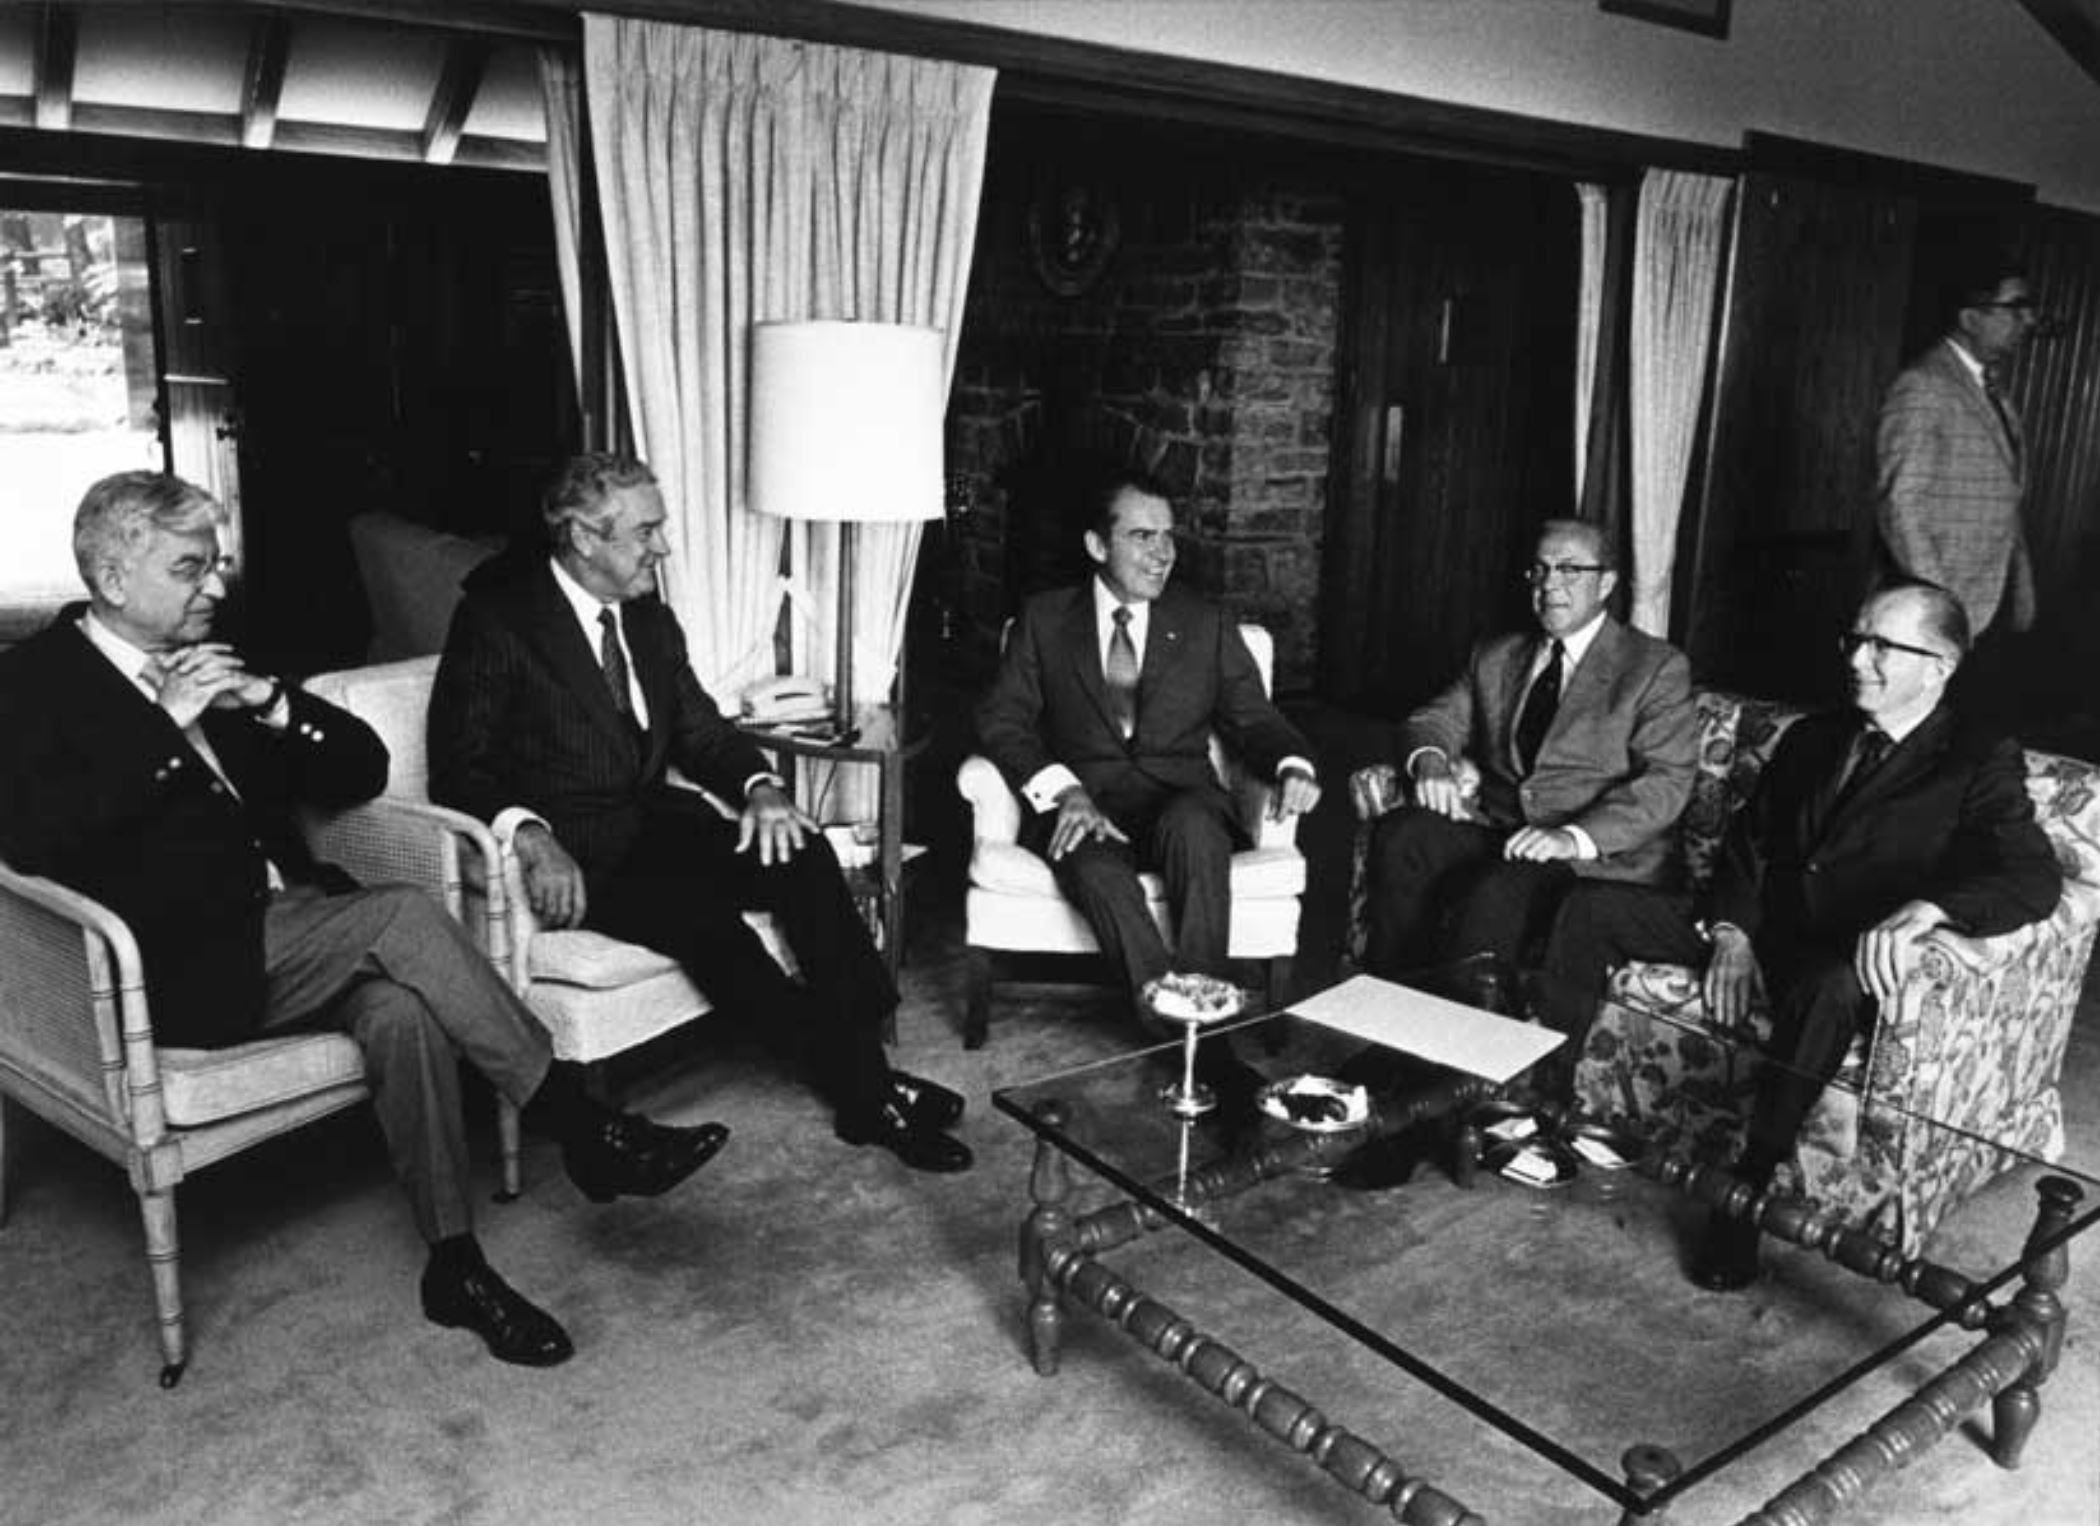 On Aug. 13-15, 1971, President Nixon and his top economic advisors met at Camp David to plot how to take America off the gold standard.